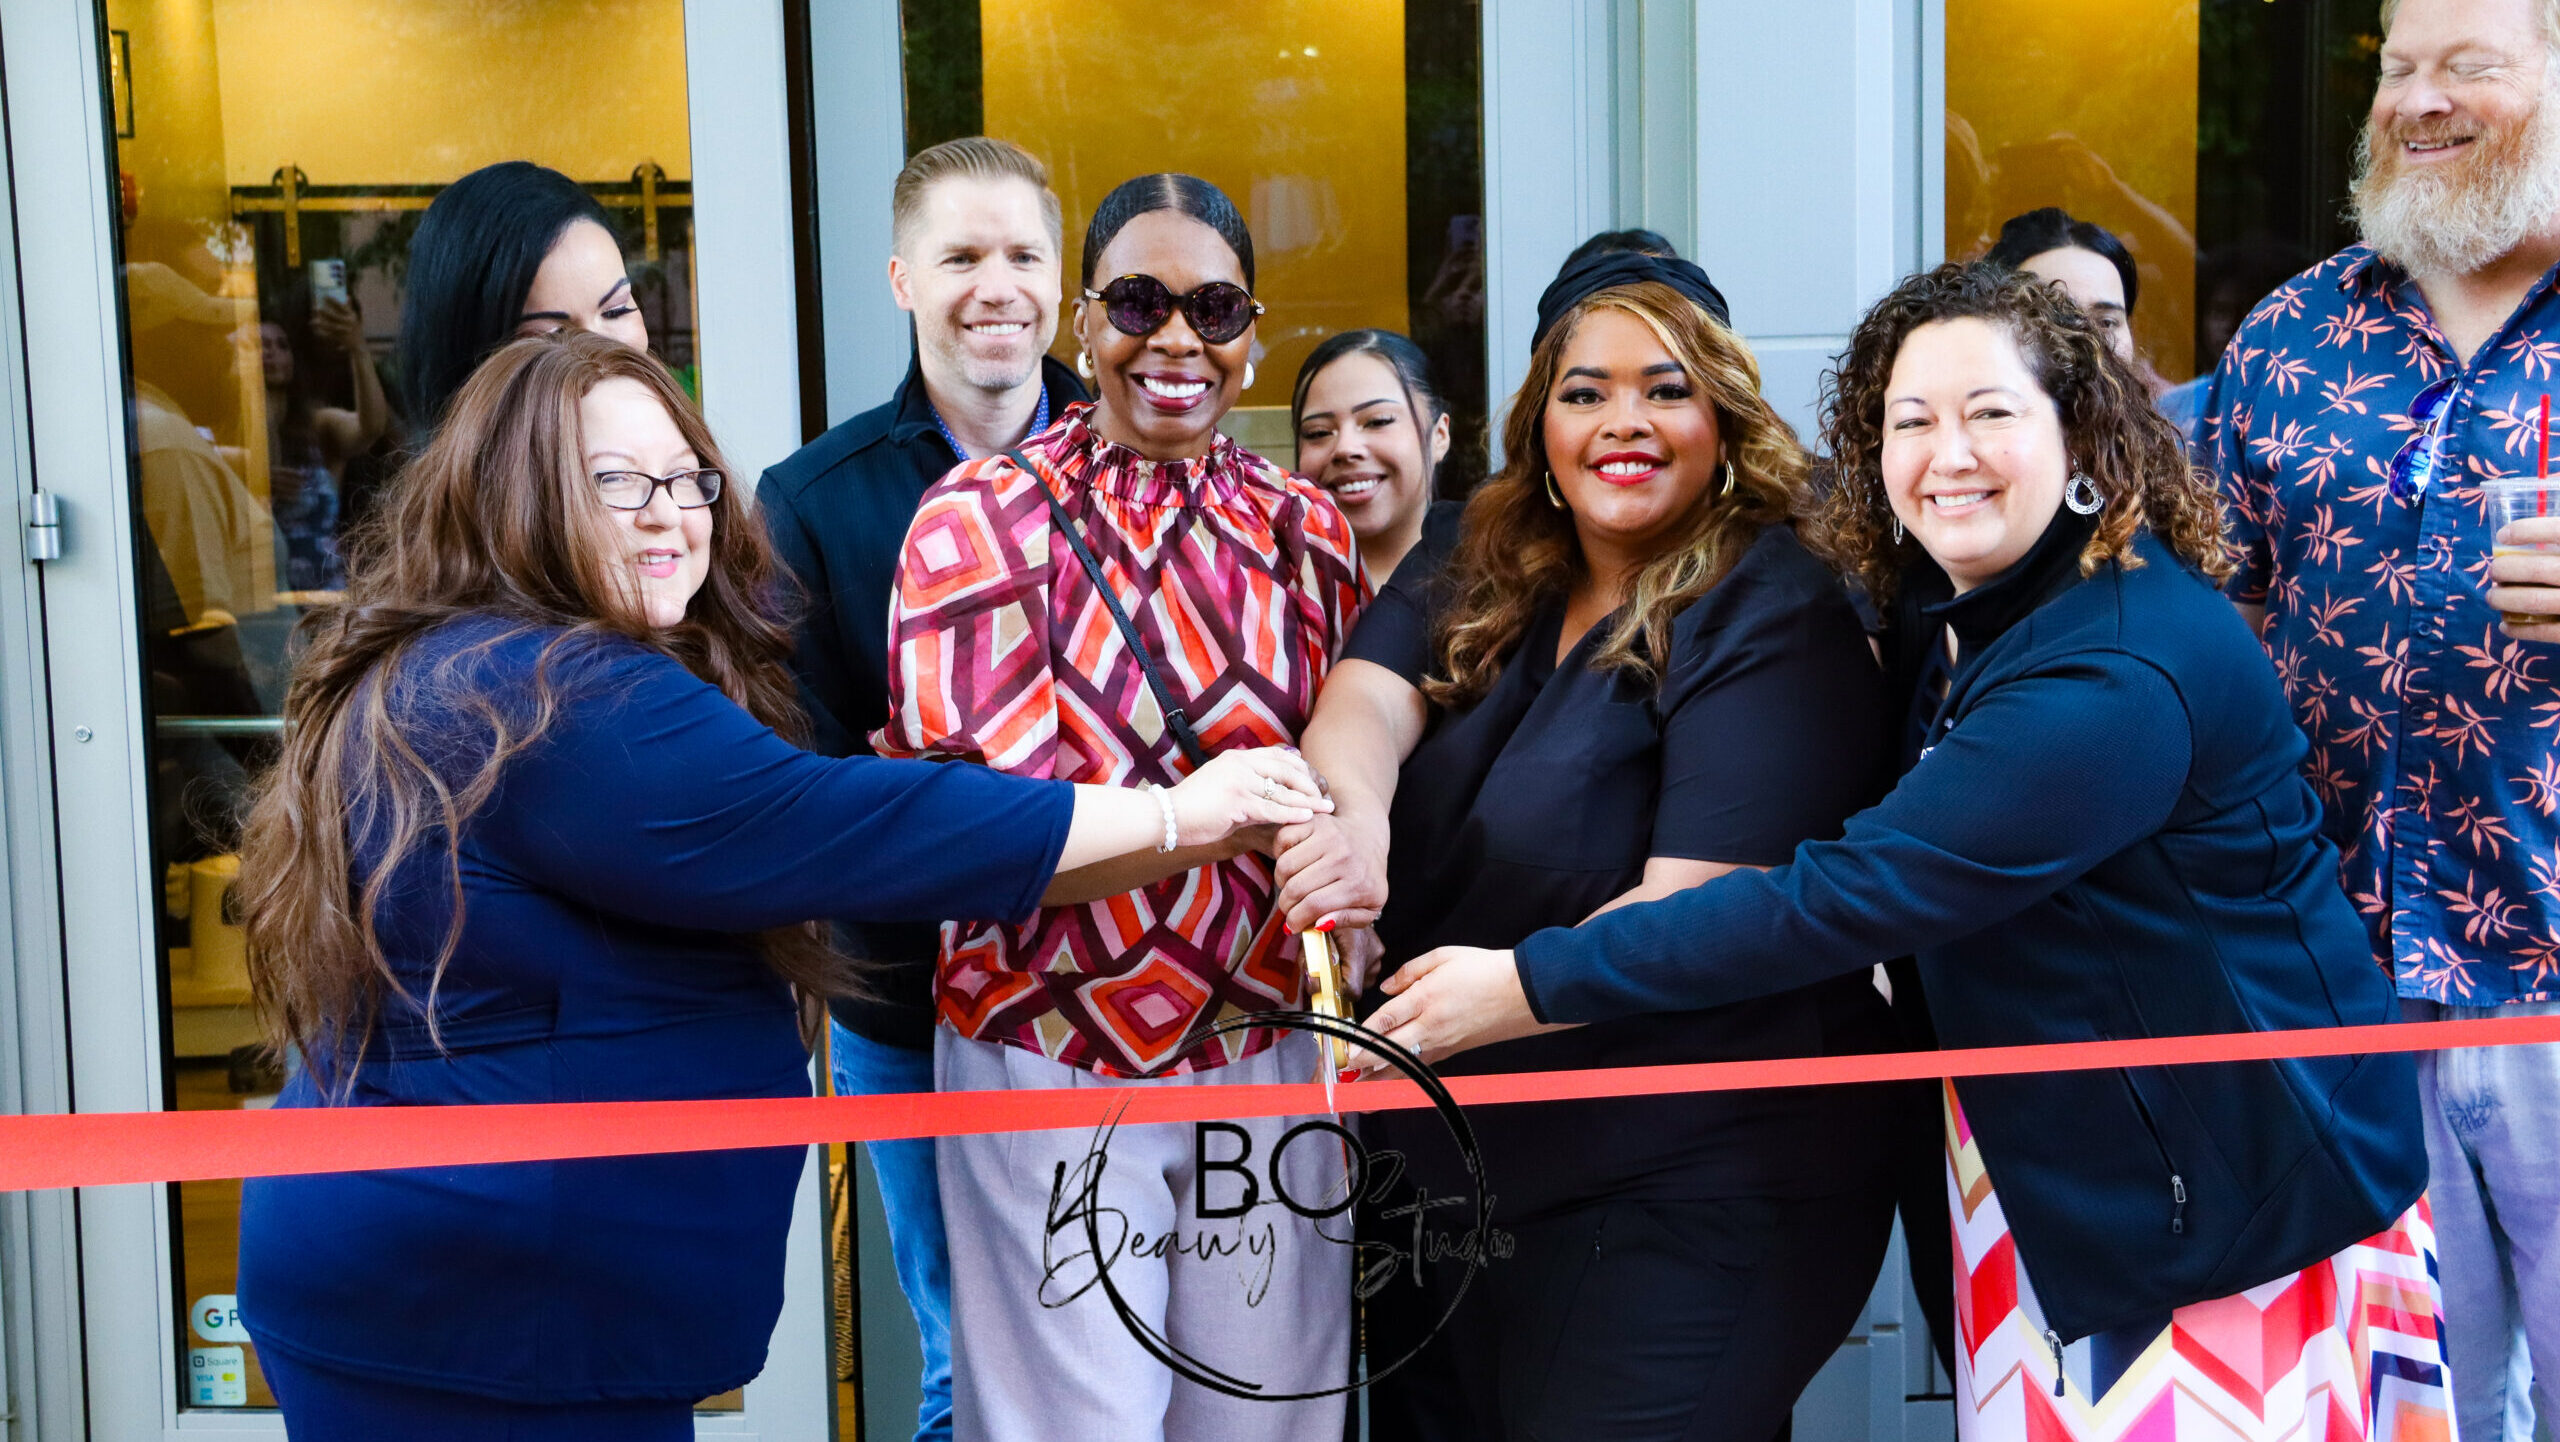 Featured image for “Empowering Entrepreneurs: Bo Beauty Studio Opens at City Creek”